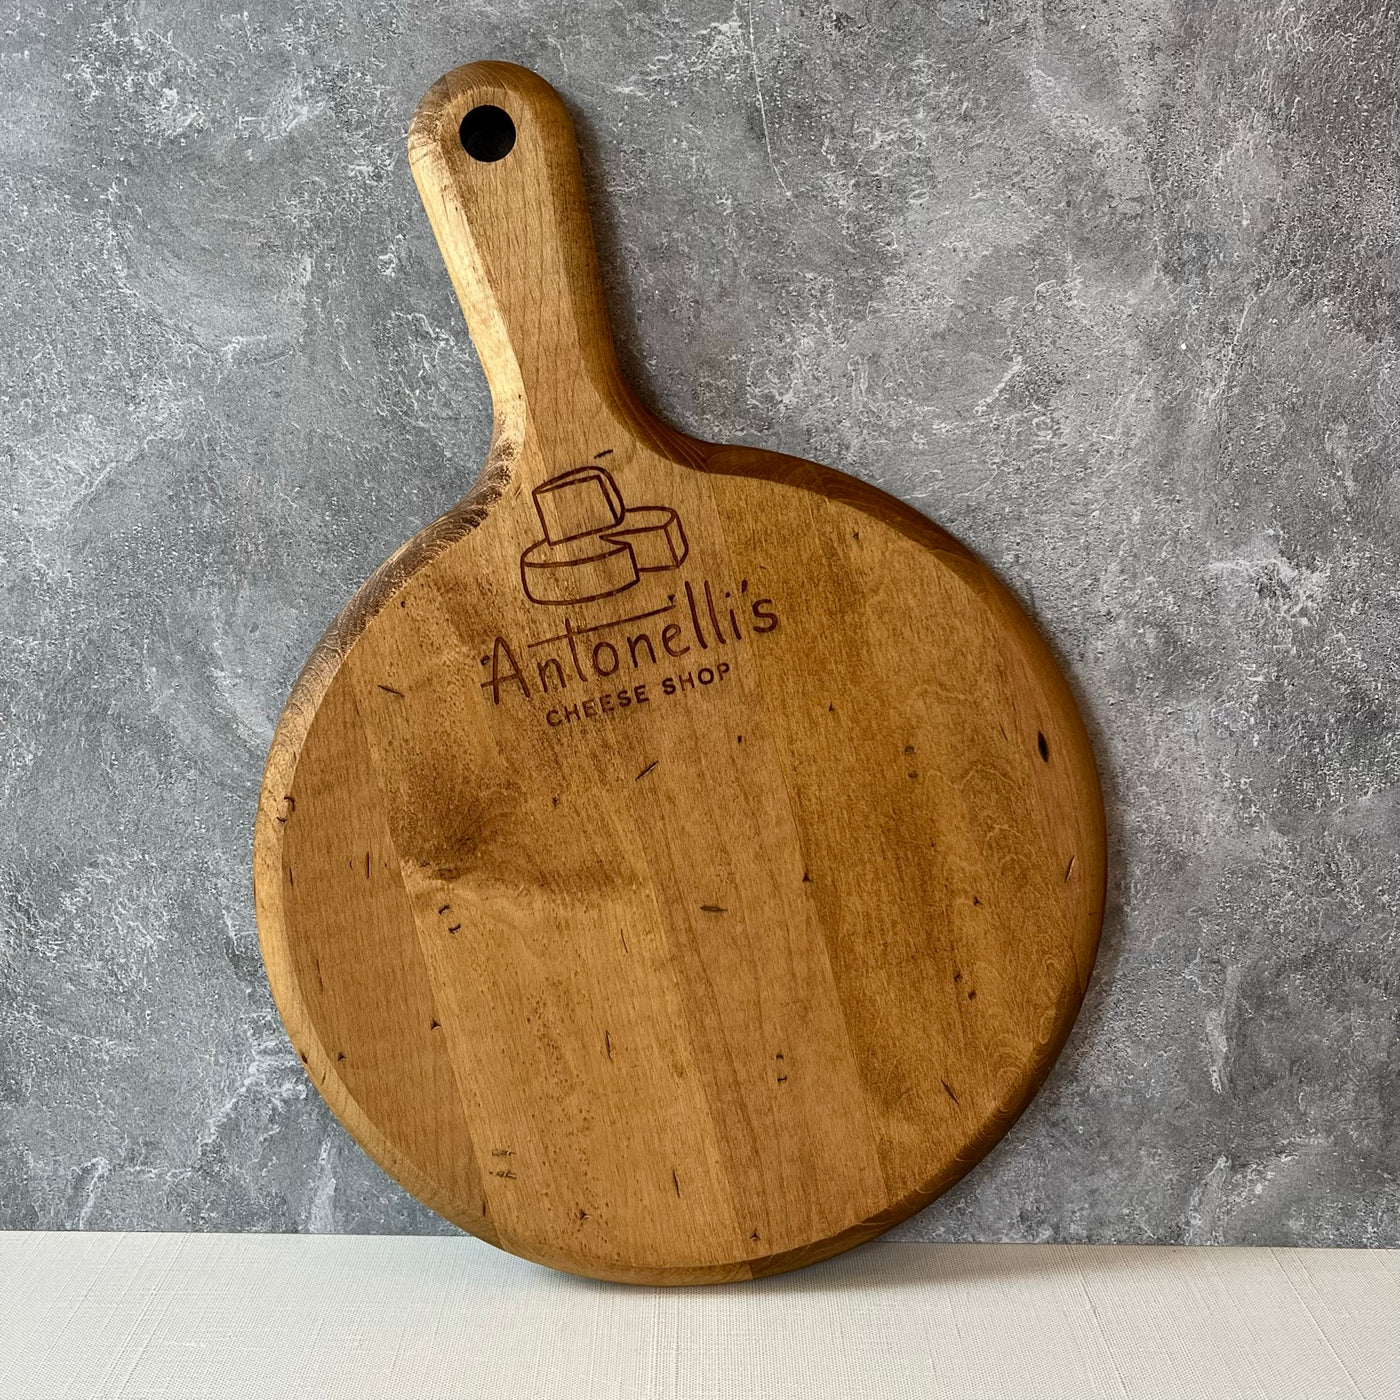 Round cutting board with handle and Antonelli's Cheese logo